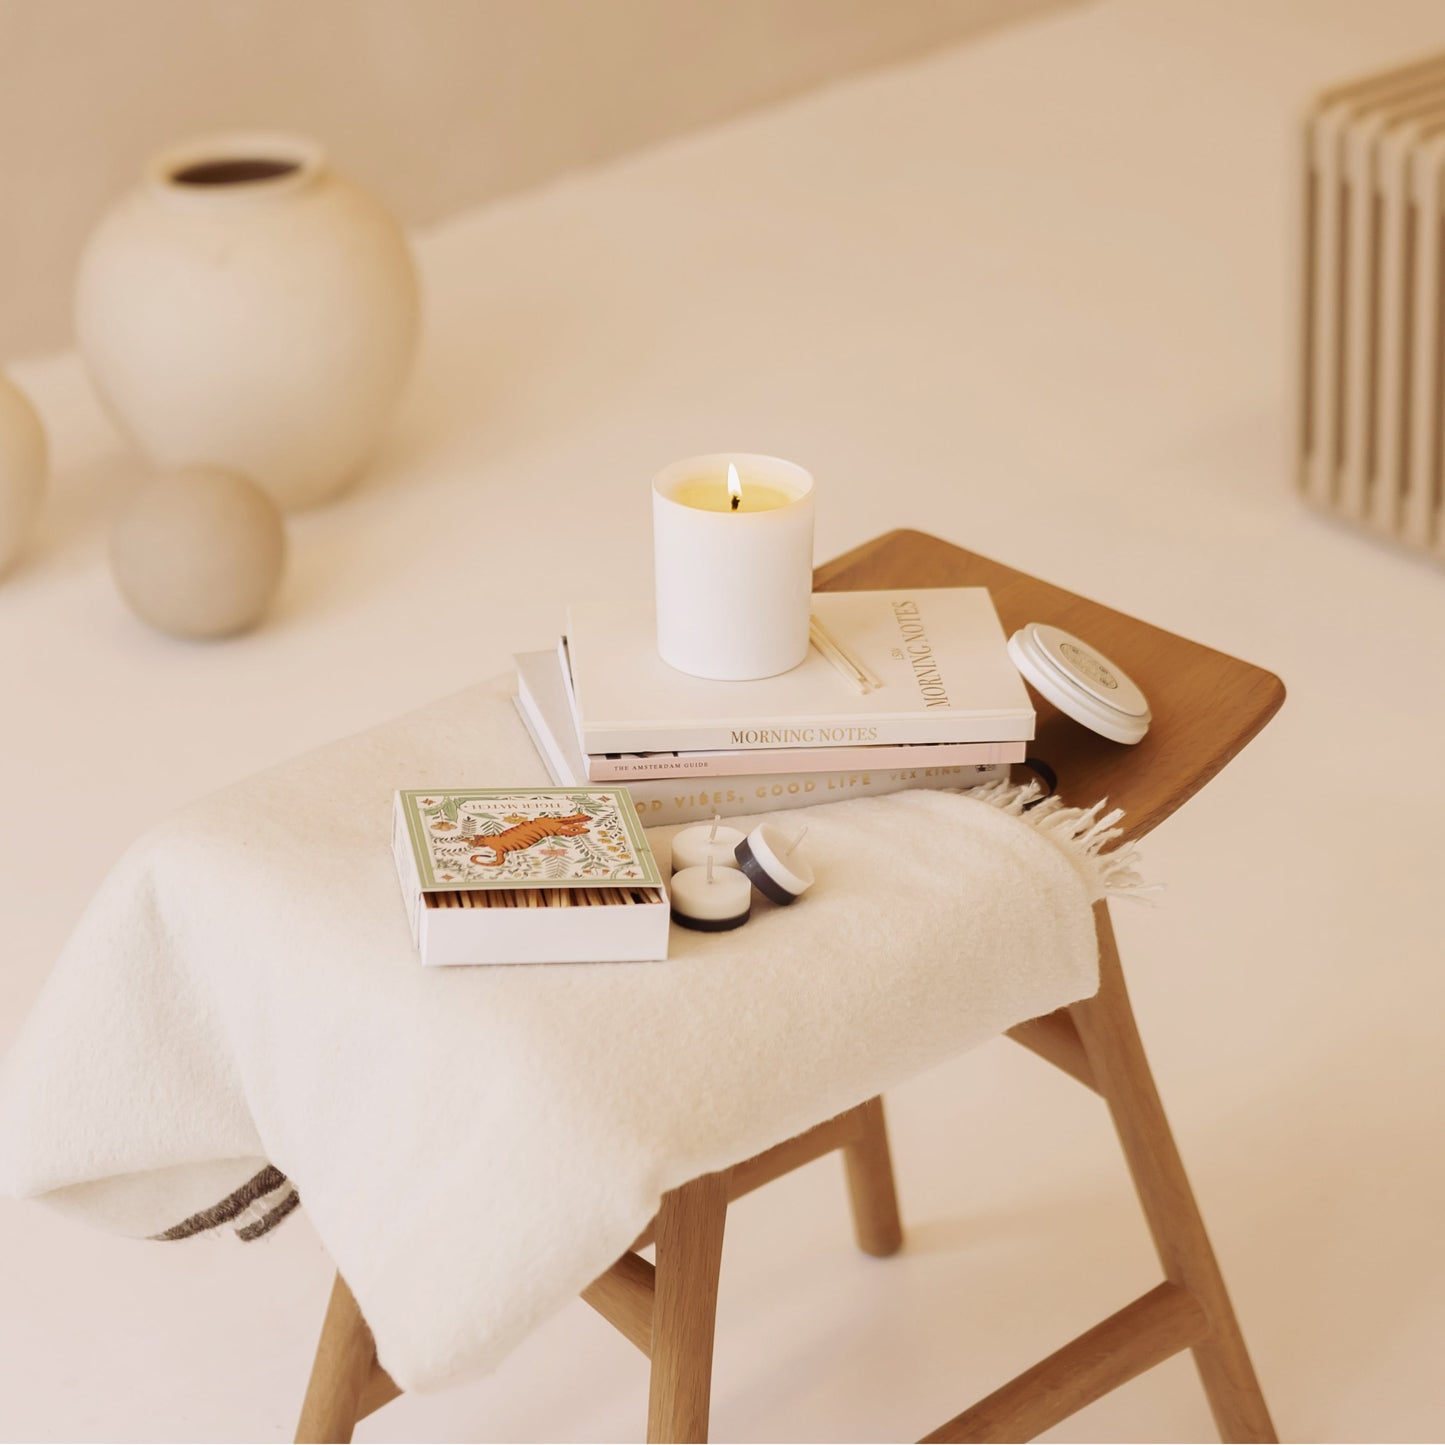 Shō-moon Energise Meditation Candle Resting on Books and Journal in a beige aesthetic